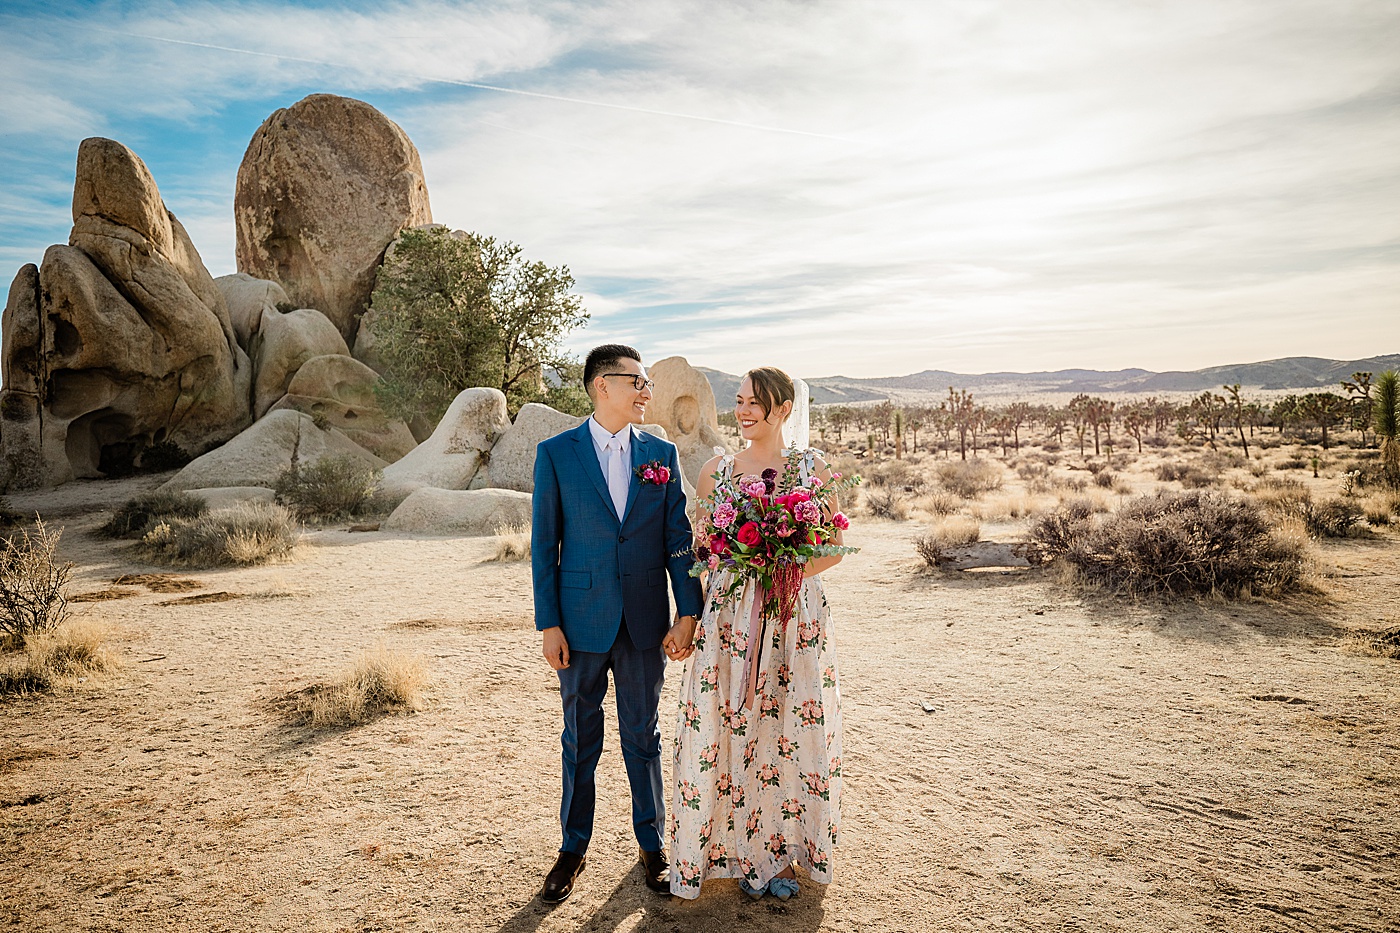 Joshua Tree elopement. Groom in a blue suit, and bride in a floral wedding dress hold hands laughing together in front of a rock formation.